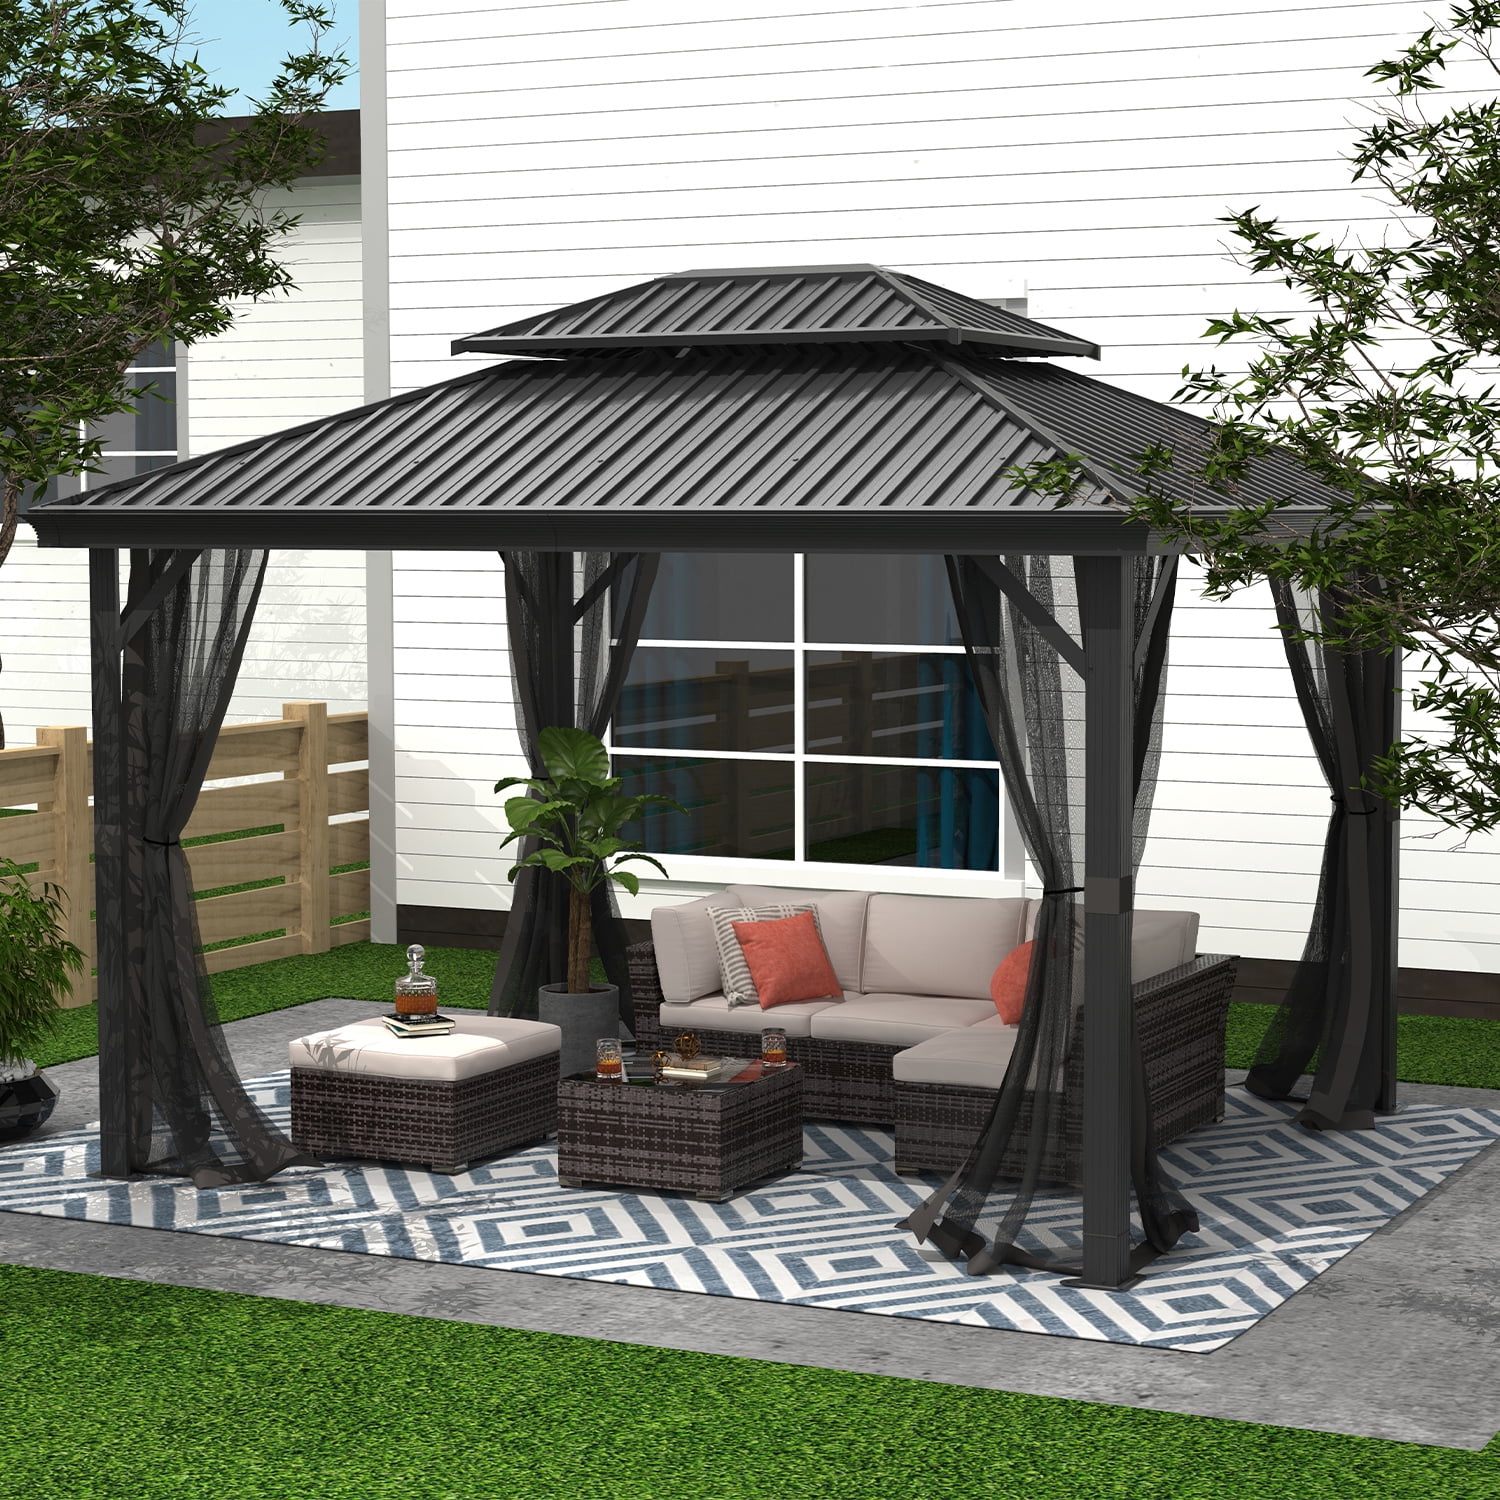 FineFind 10ft x 12ft Hardtop Gazebo with Netting for Patios, Lawn ... - 588148c9 C4a8 44be 8e88 2b684f1cb0a4.8D1487f02a0a00464b498211eafe409a